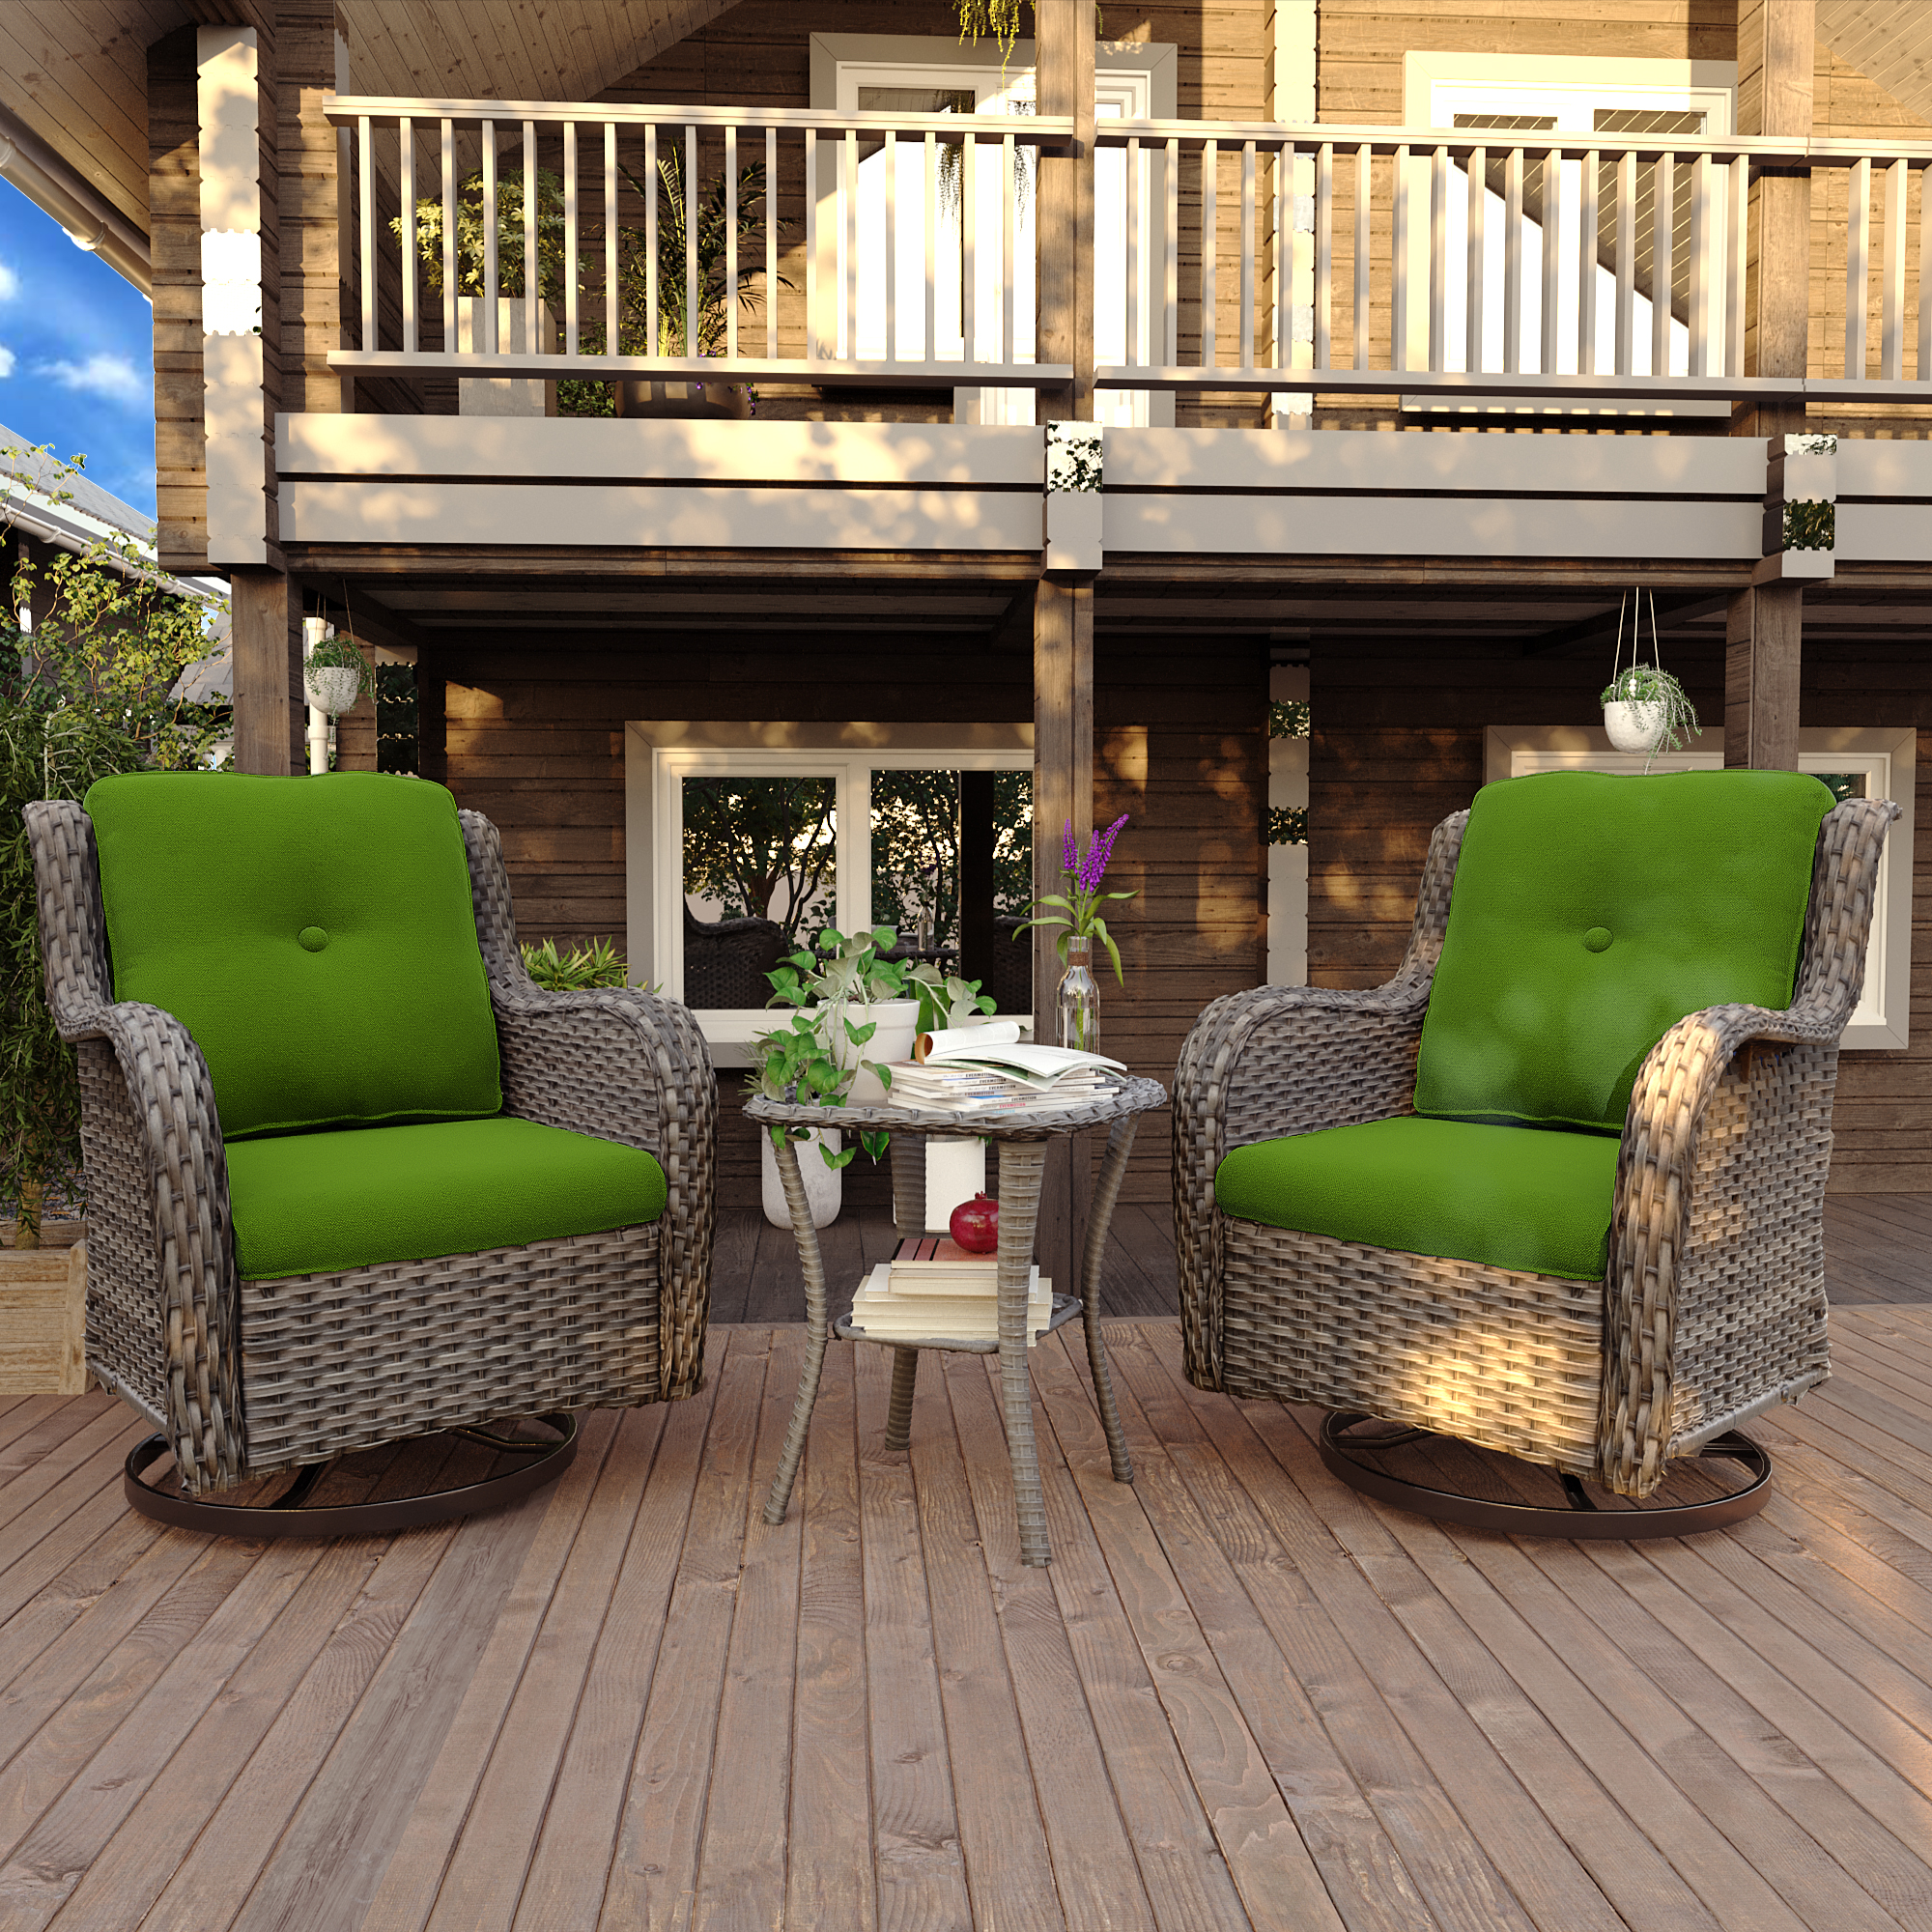 Meetleisure Outdoor Swivel Rocker Wicker Patio Chairs Sets of 2 With Table, Green - image 4 of 6